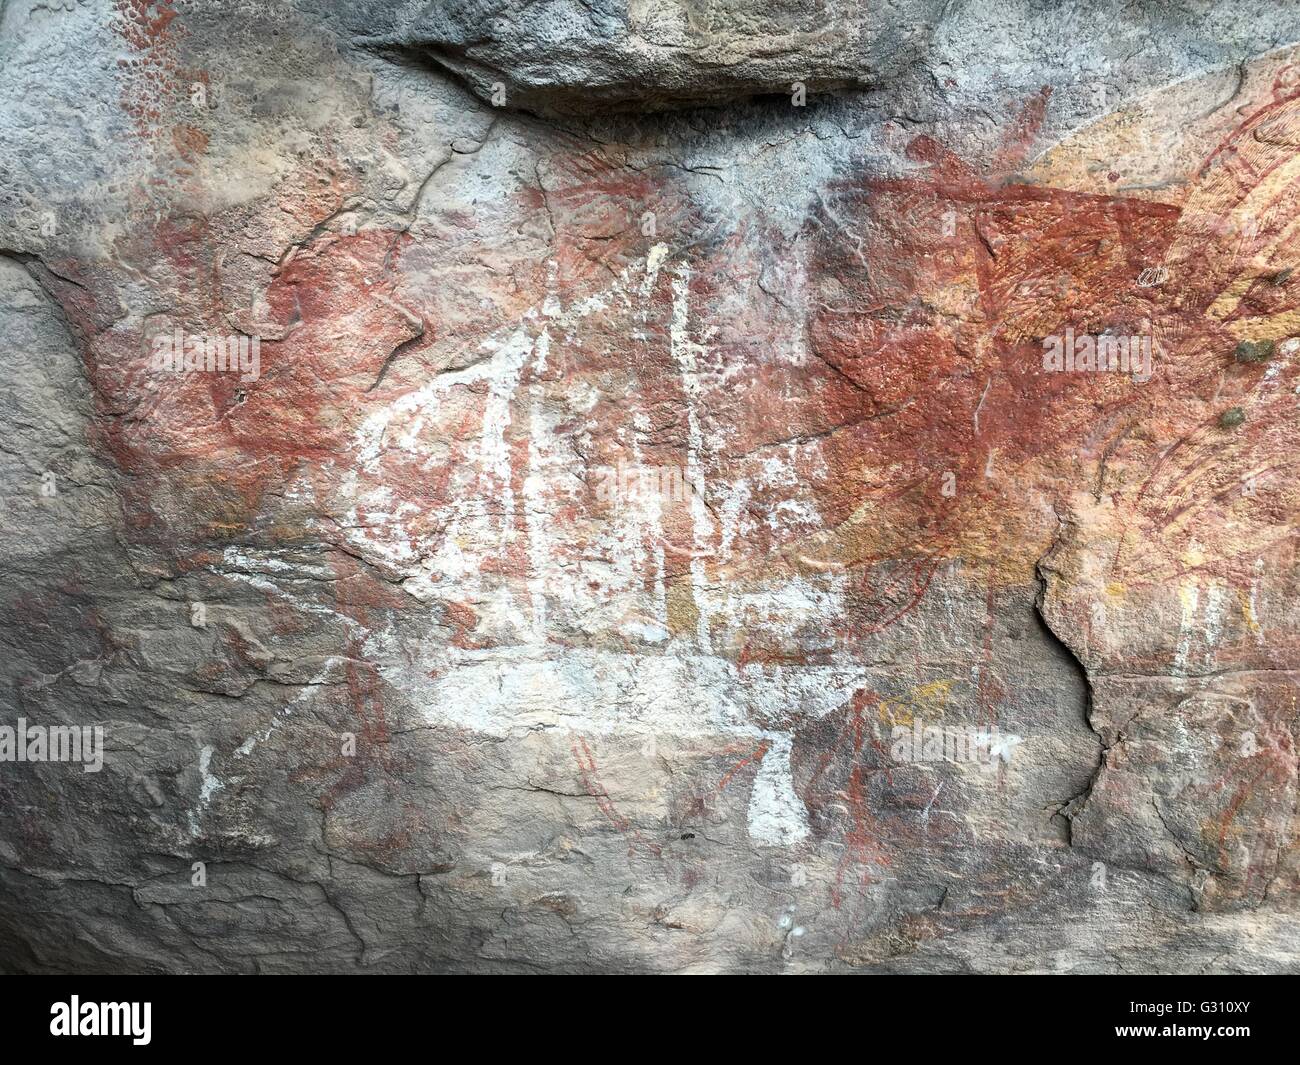 A white sailing vessel known as 'Contact Art' painted at Hawk Dreaming at Cannon Hill, Kakadu National Park, Australia. Stock Photo